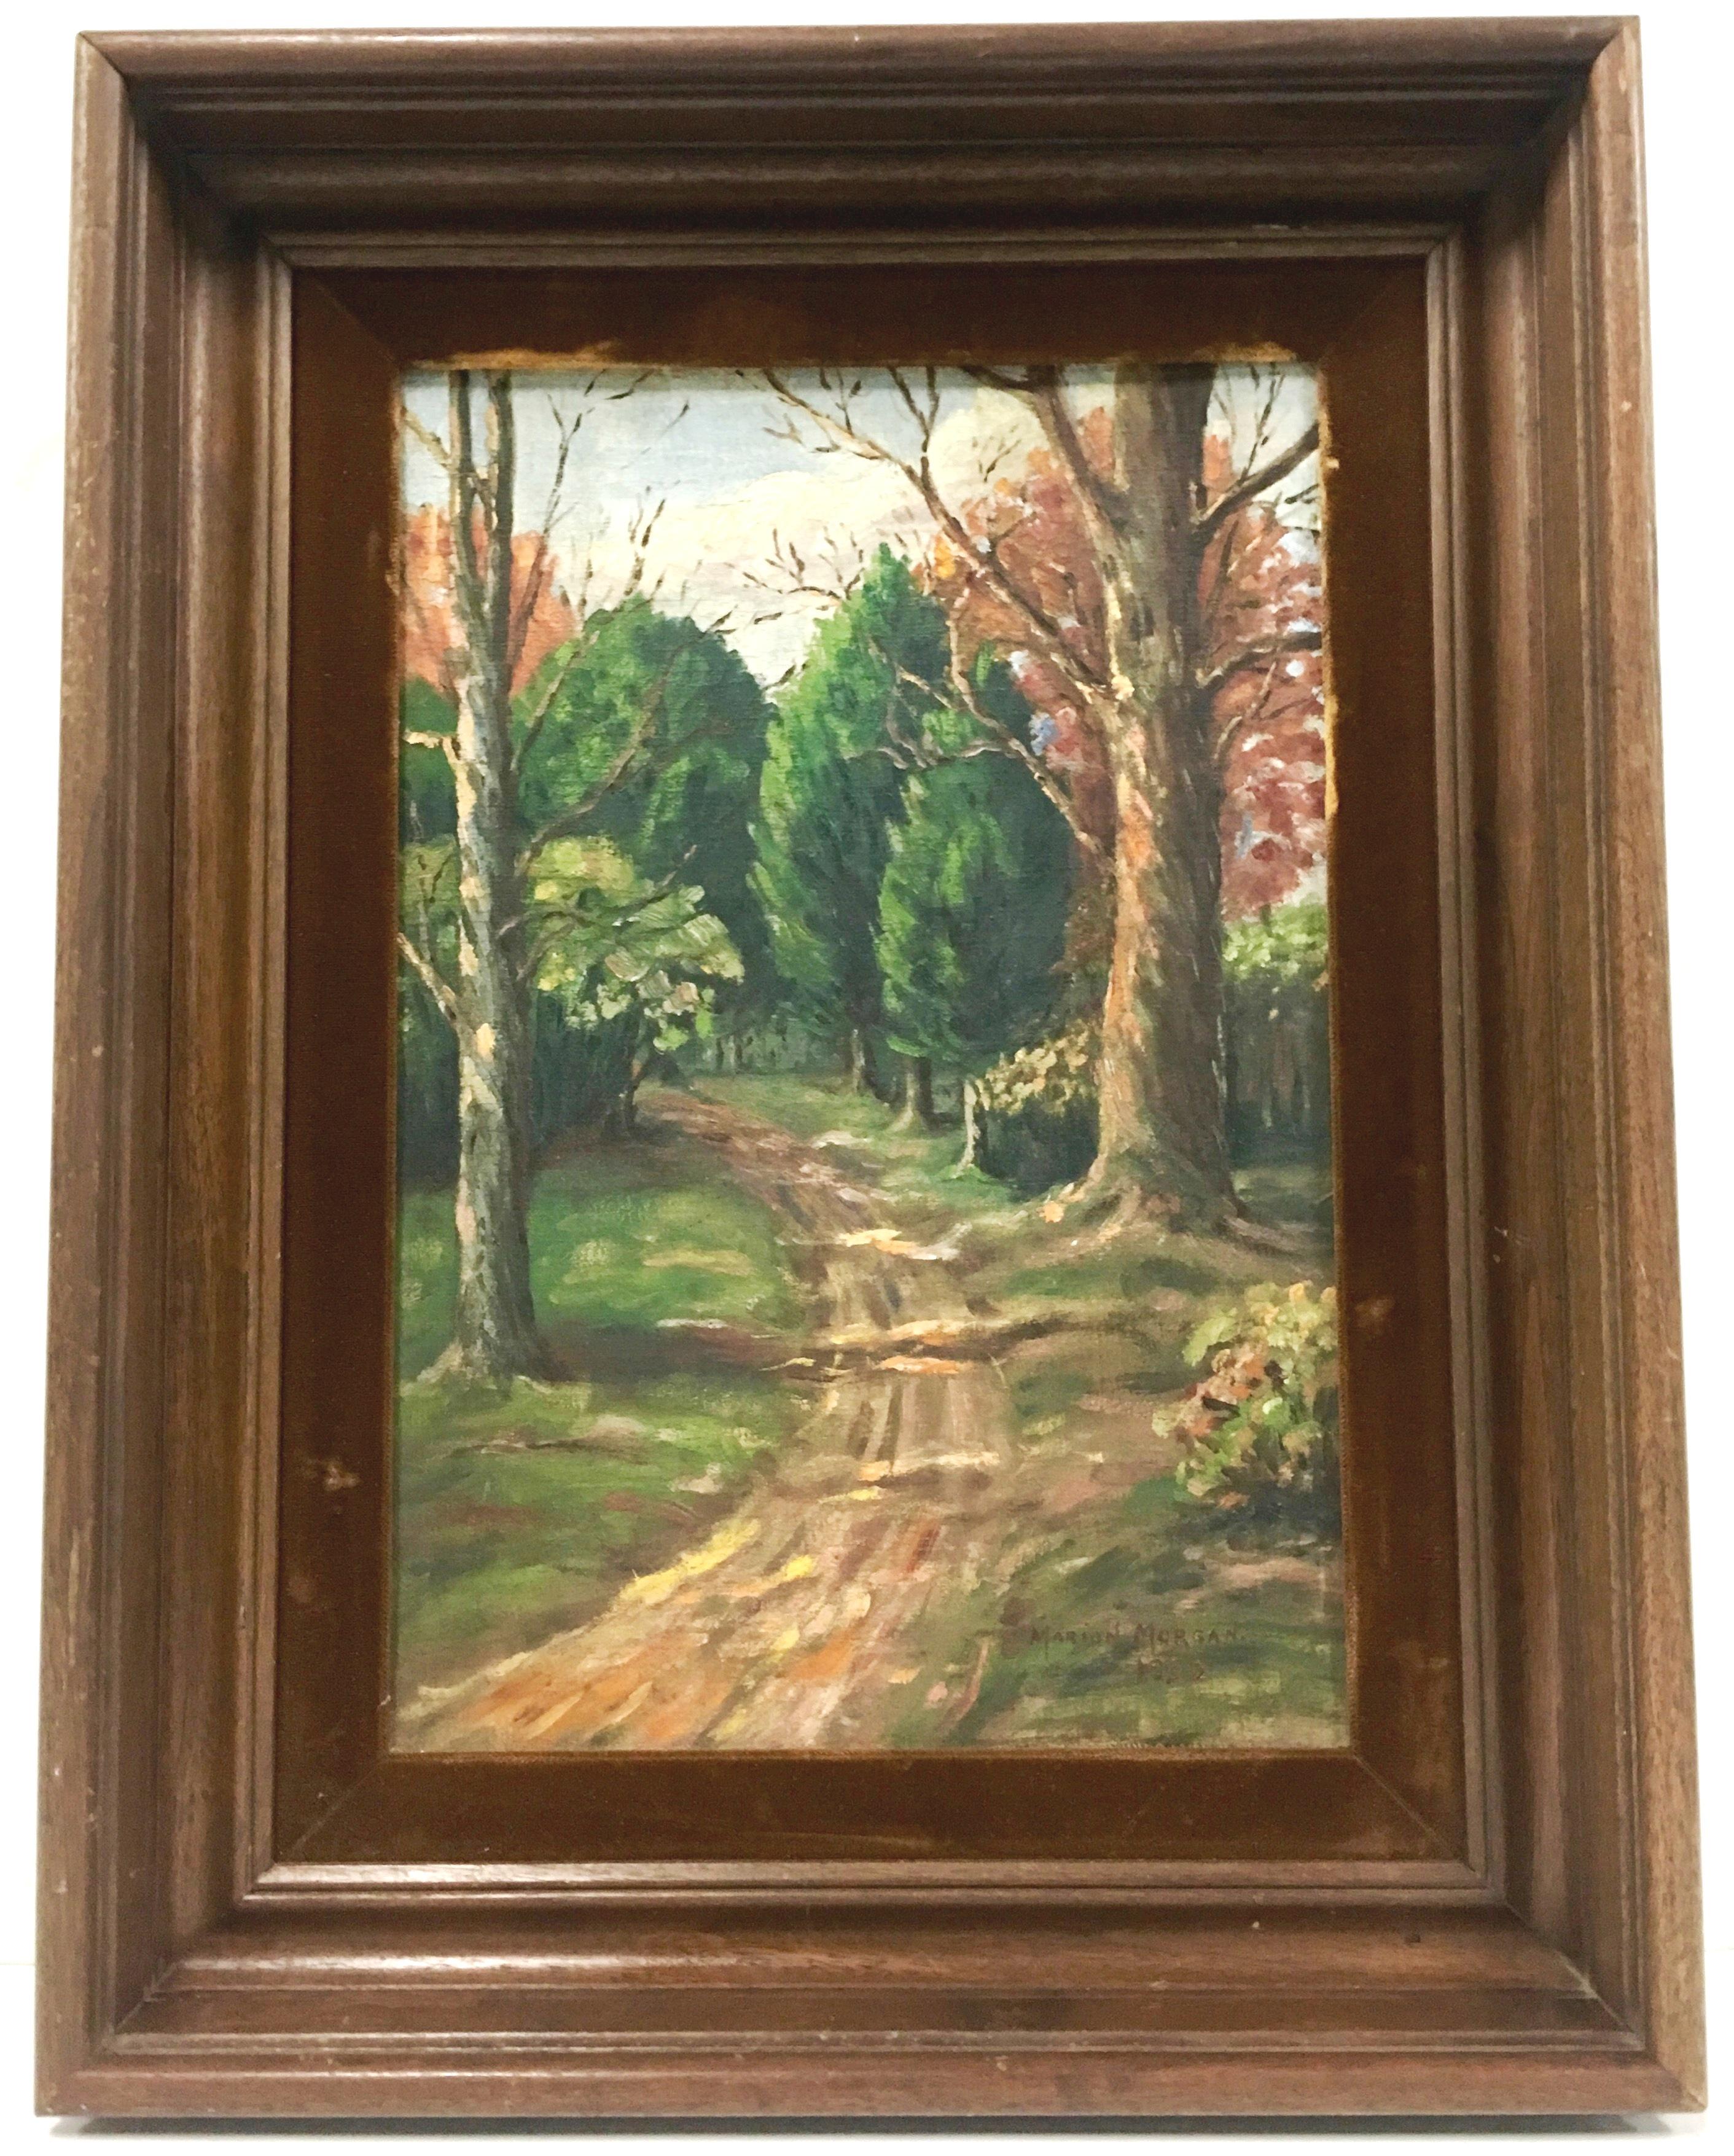 1932 original oil on canvas board painting by, Marion Morgan. Signed lower right, Marion Morgan 1921. Framed in a dark wood stained frame with brown velvet matte. Image size, 13